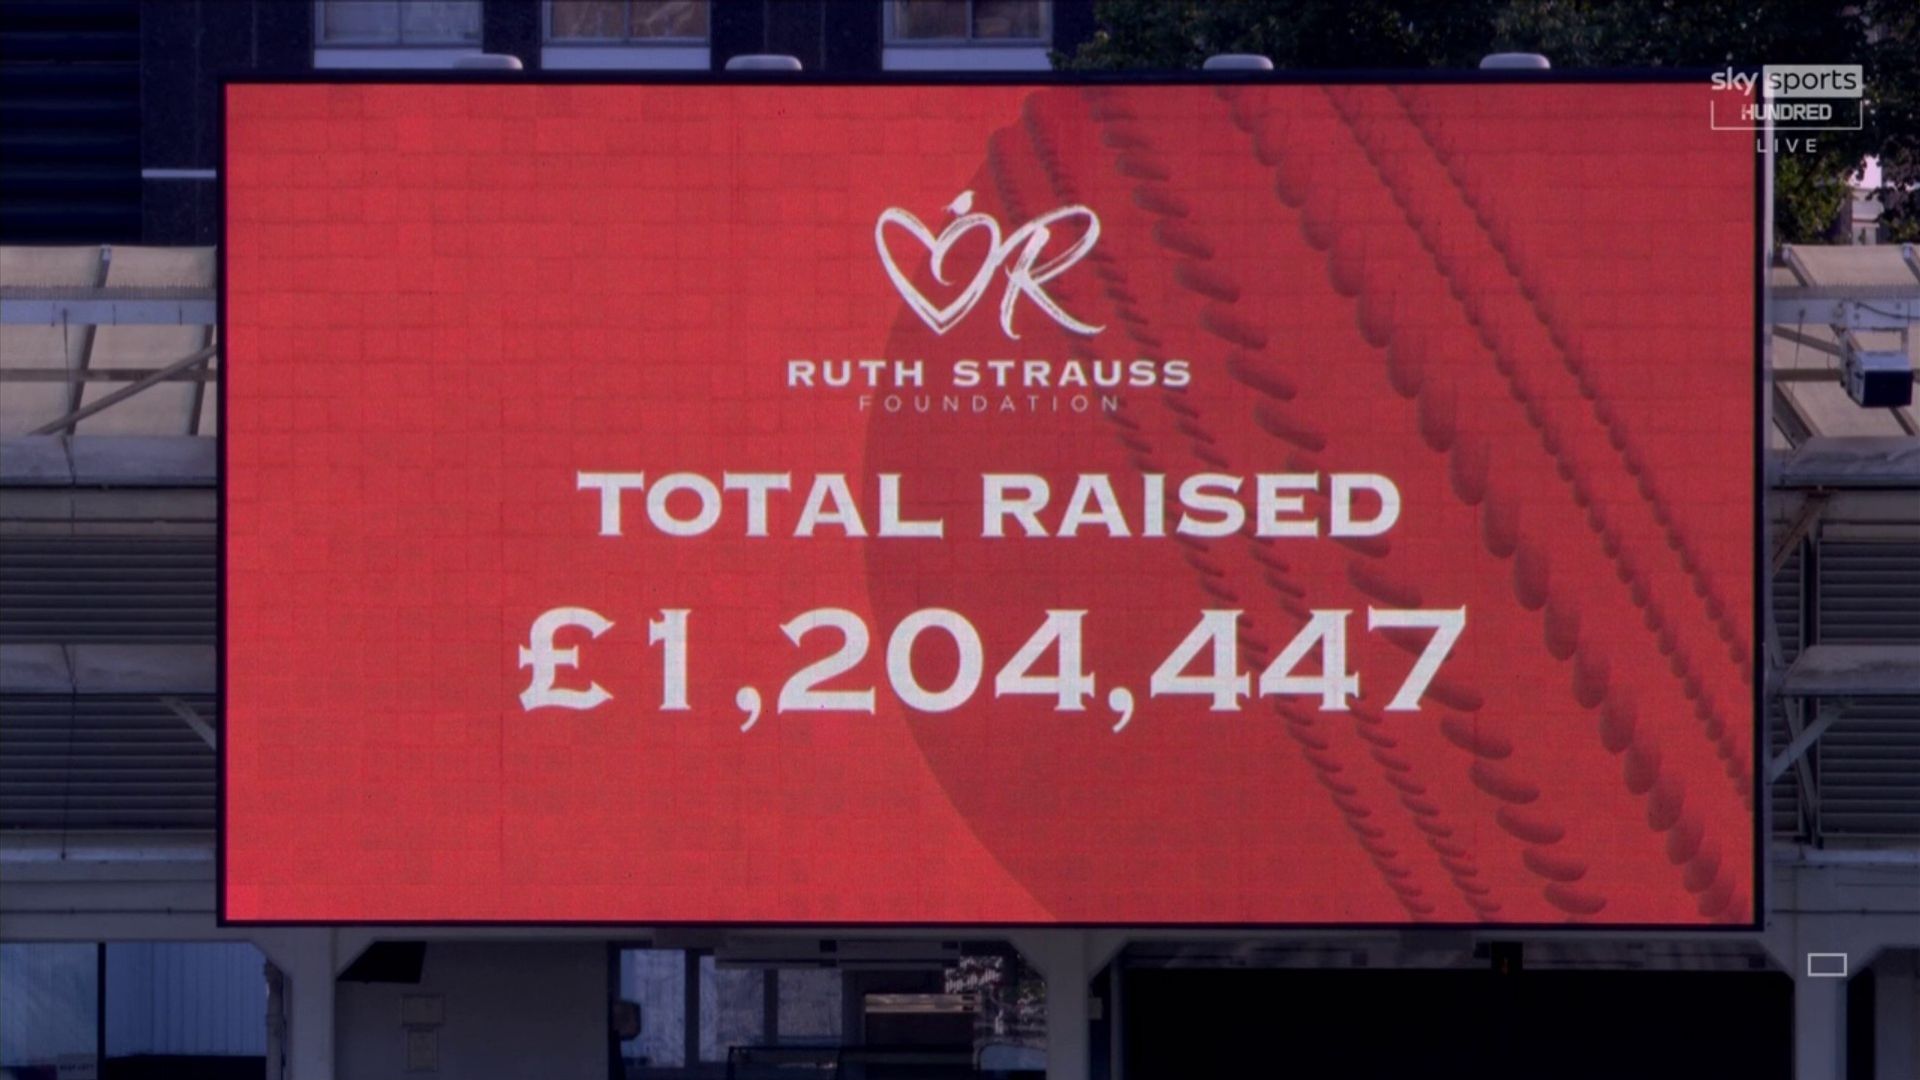 Ruth Strauss Foundation raises £1.2m during Lord's Test